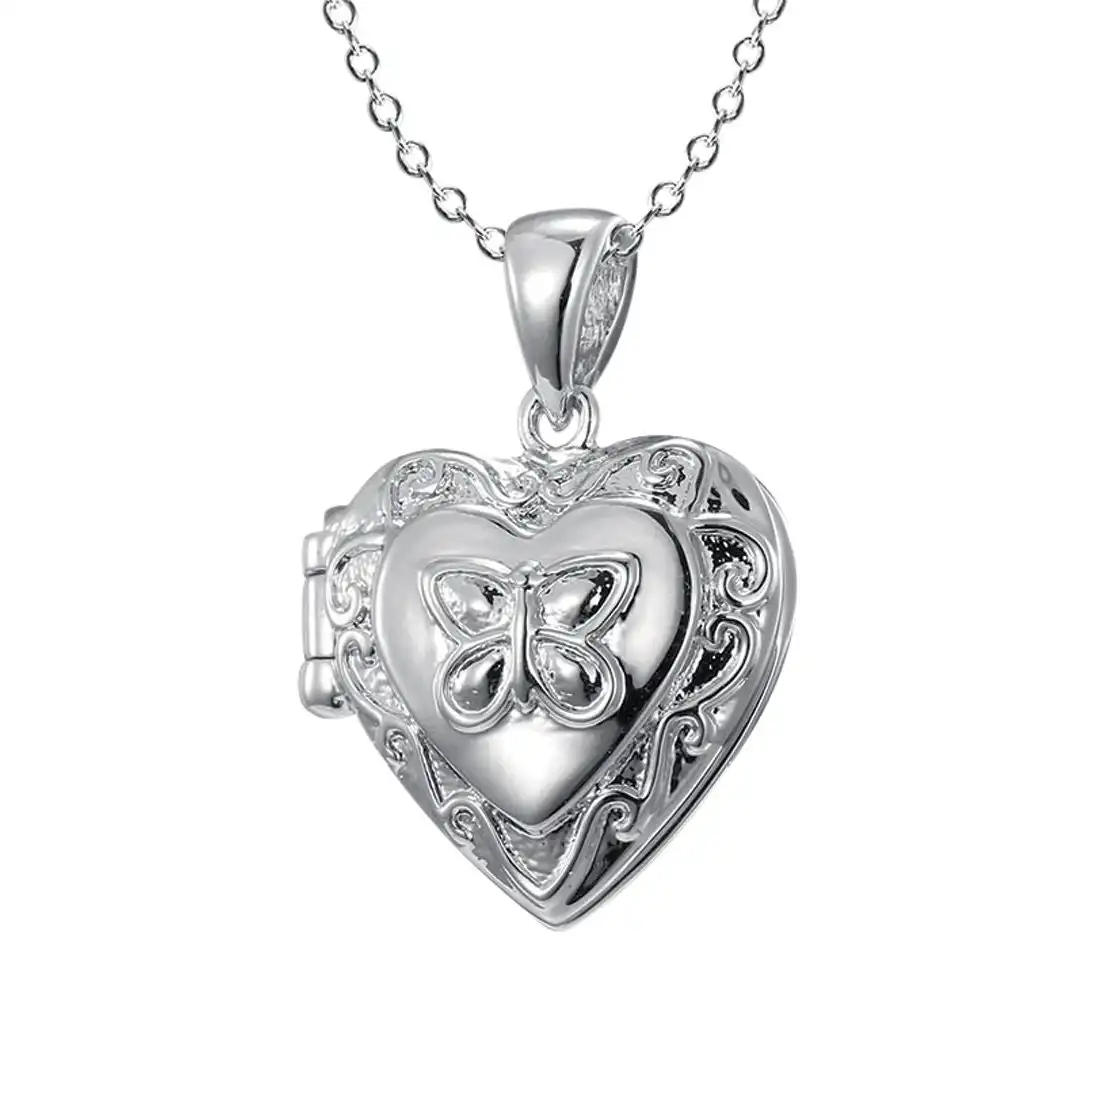 45cm Children's Sterling Silver Engraved Heart Locket with Butterfly